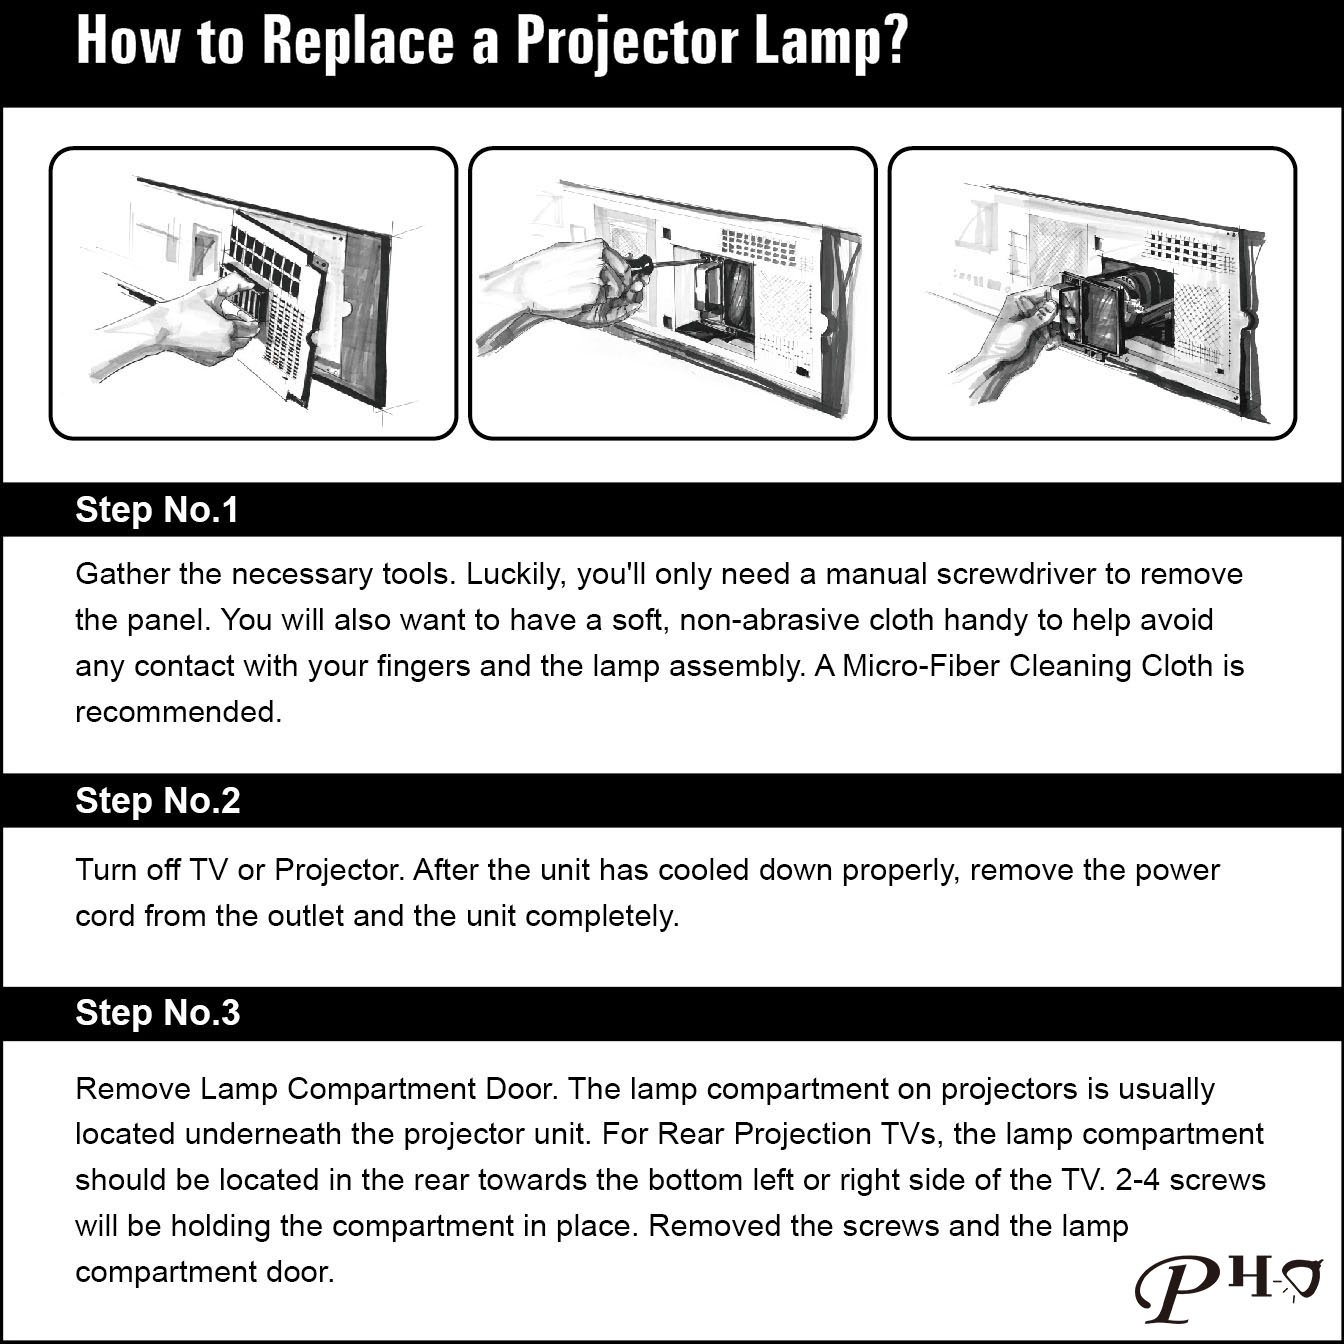 PHO BL-FU190C / FX.PQ484-2401 Original Genuine Replacement Projection Lamp with Housing for Optoma S310 S313 S302 S303 S2010 S2015 DS328 DS313 DS330 DS331 DS343 DX343 ( OEM Philips Bulb Inside)